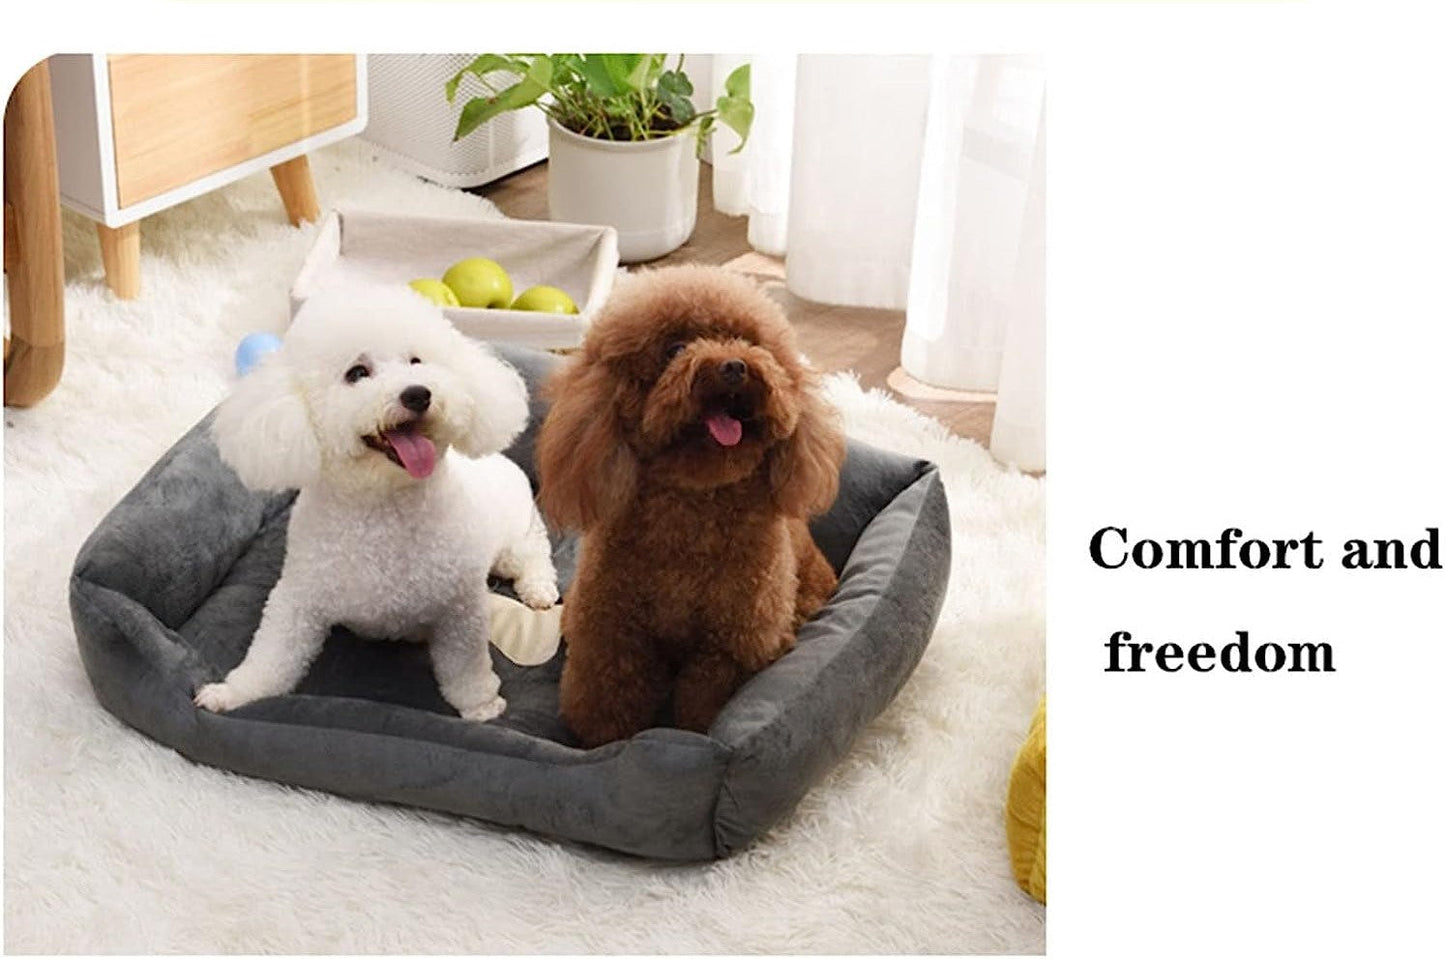 Super Soft Dog Beds Waterproof Bottom - Warm Bed For Dog & Cat - Cream and Grey